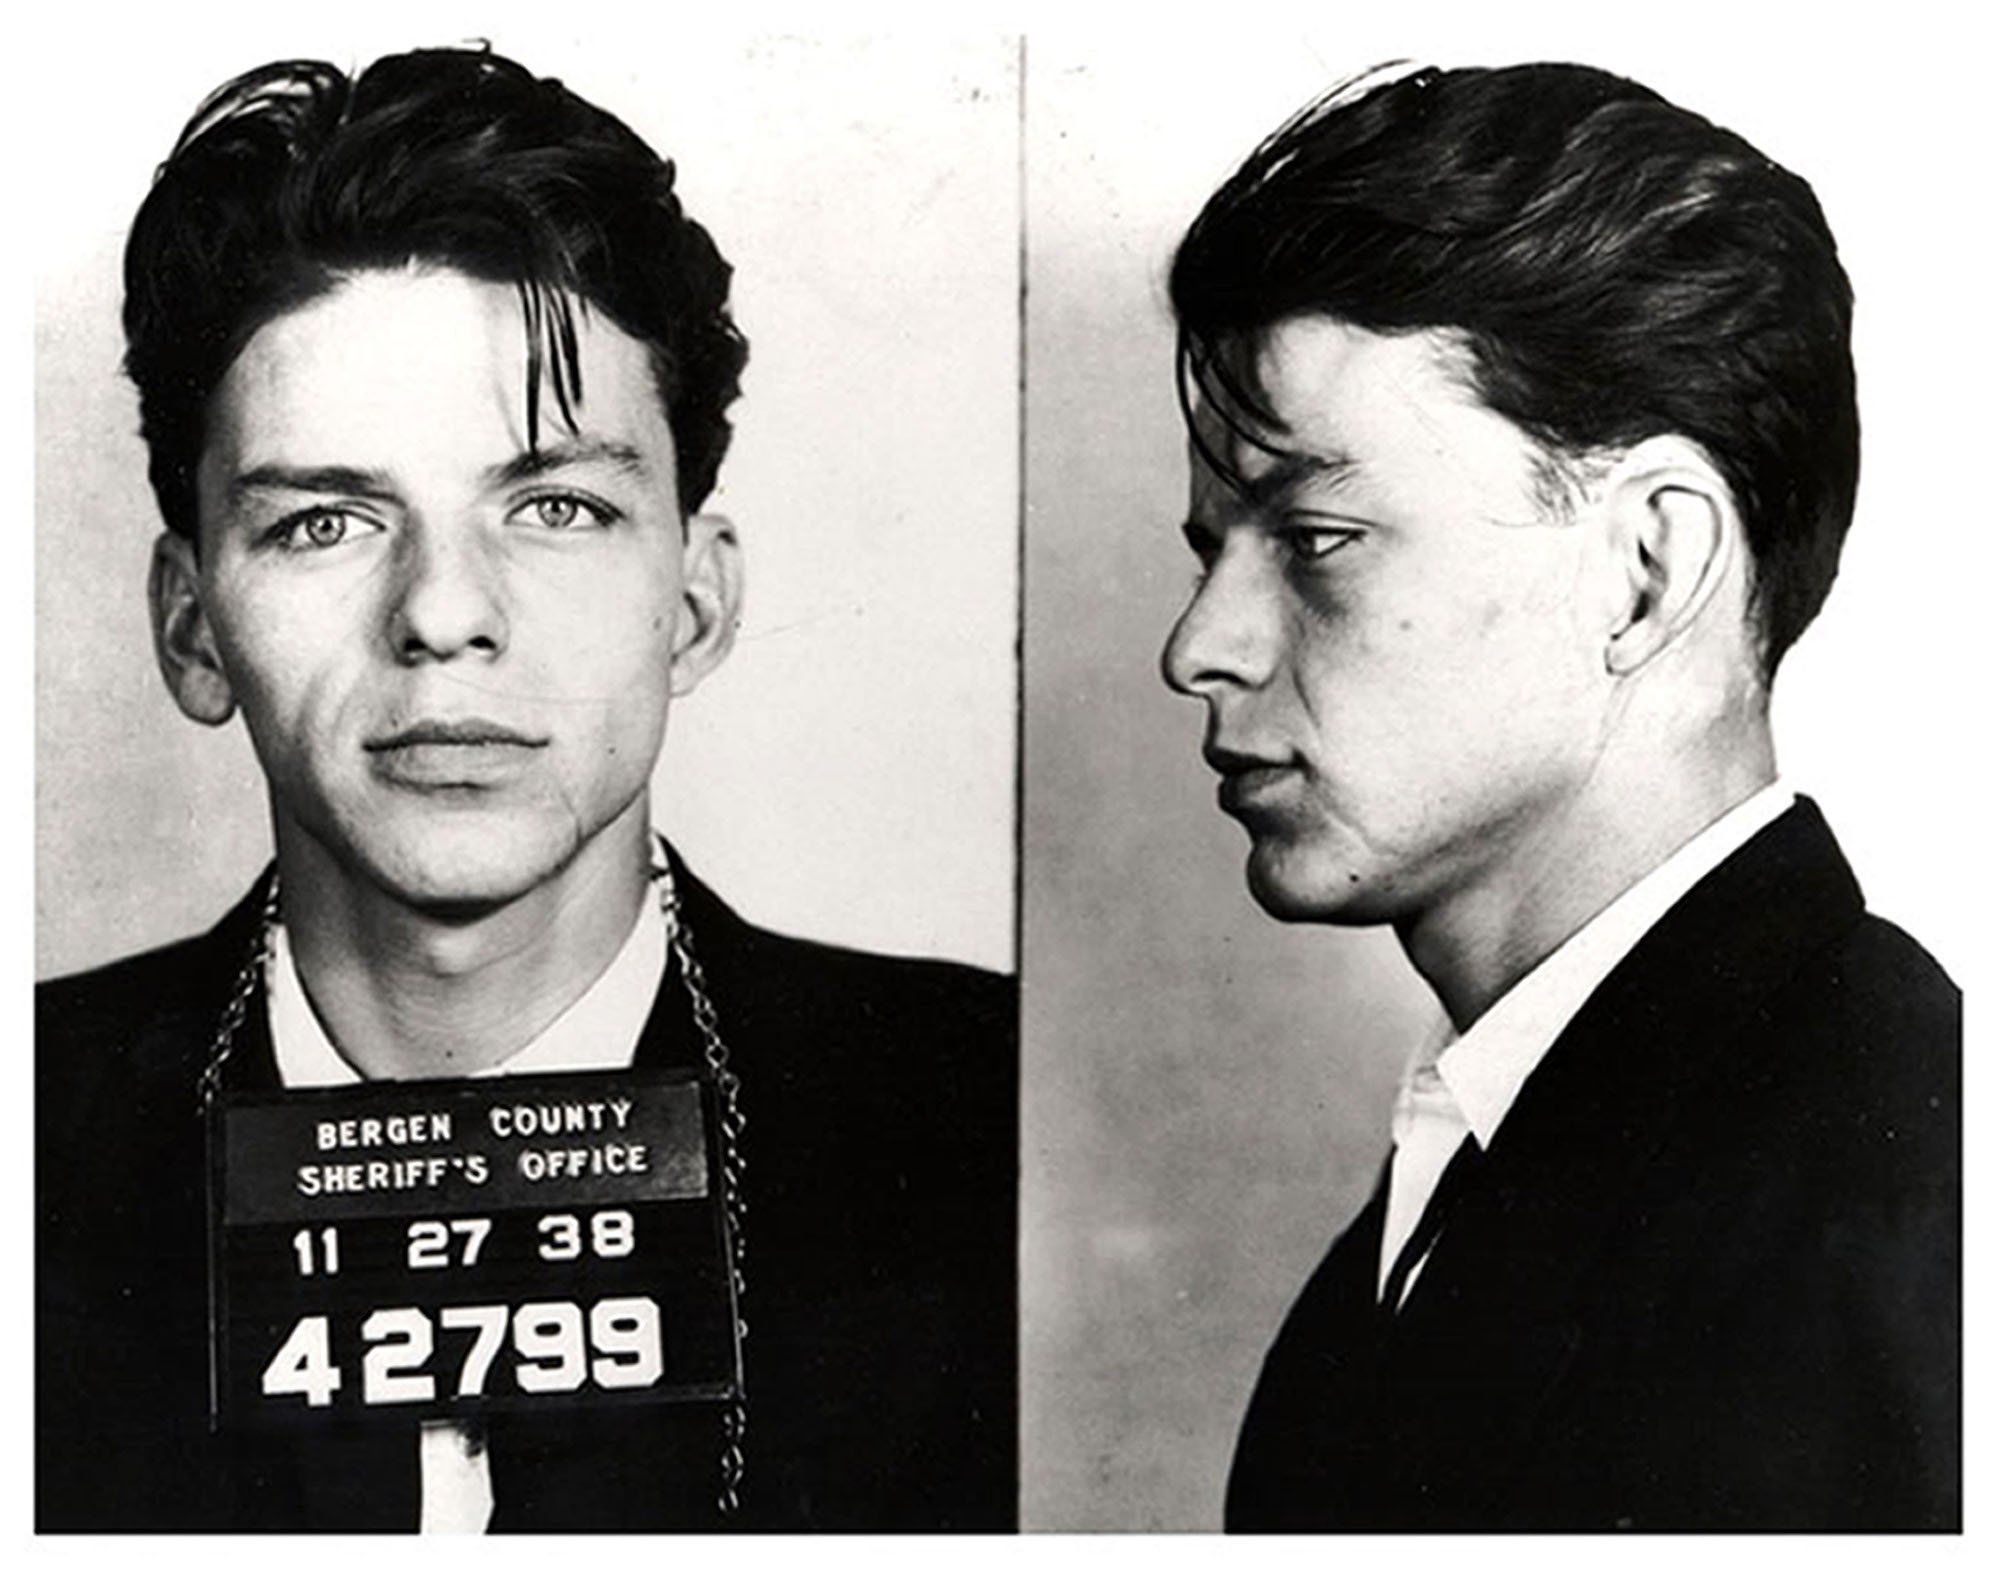 There’s an Unusual Crime Behind Frank Sinatra’s Famous Mugshot